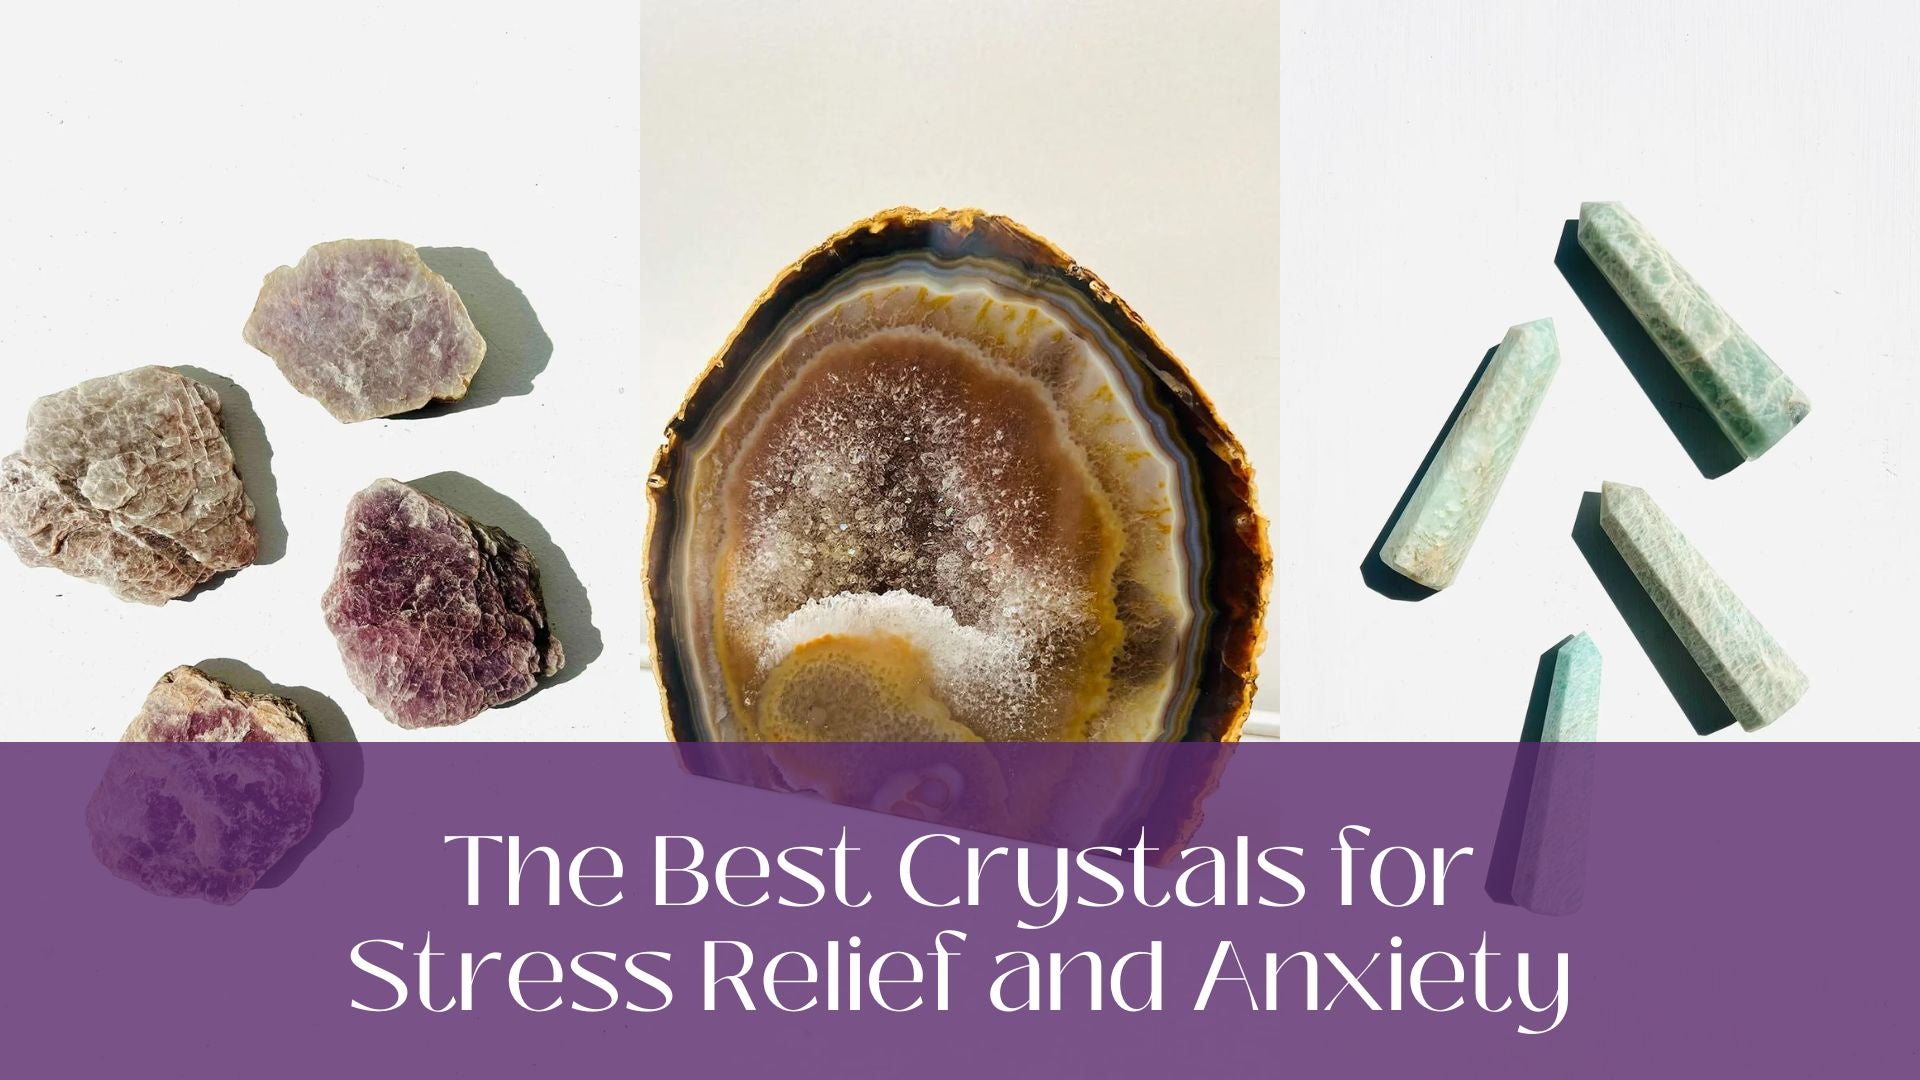 The Best Crystals for Stress Relief and Anxiety